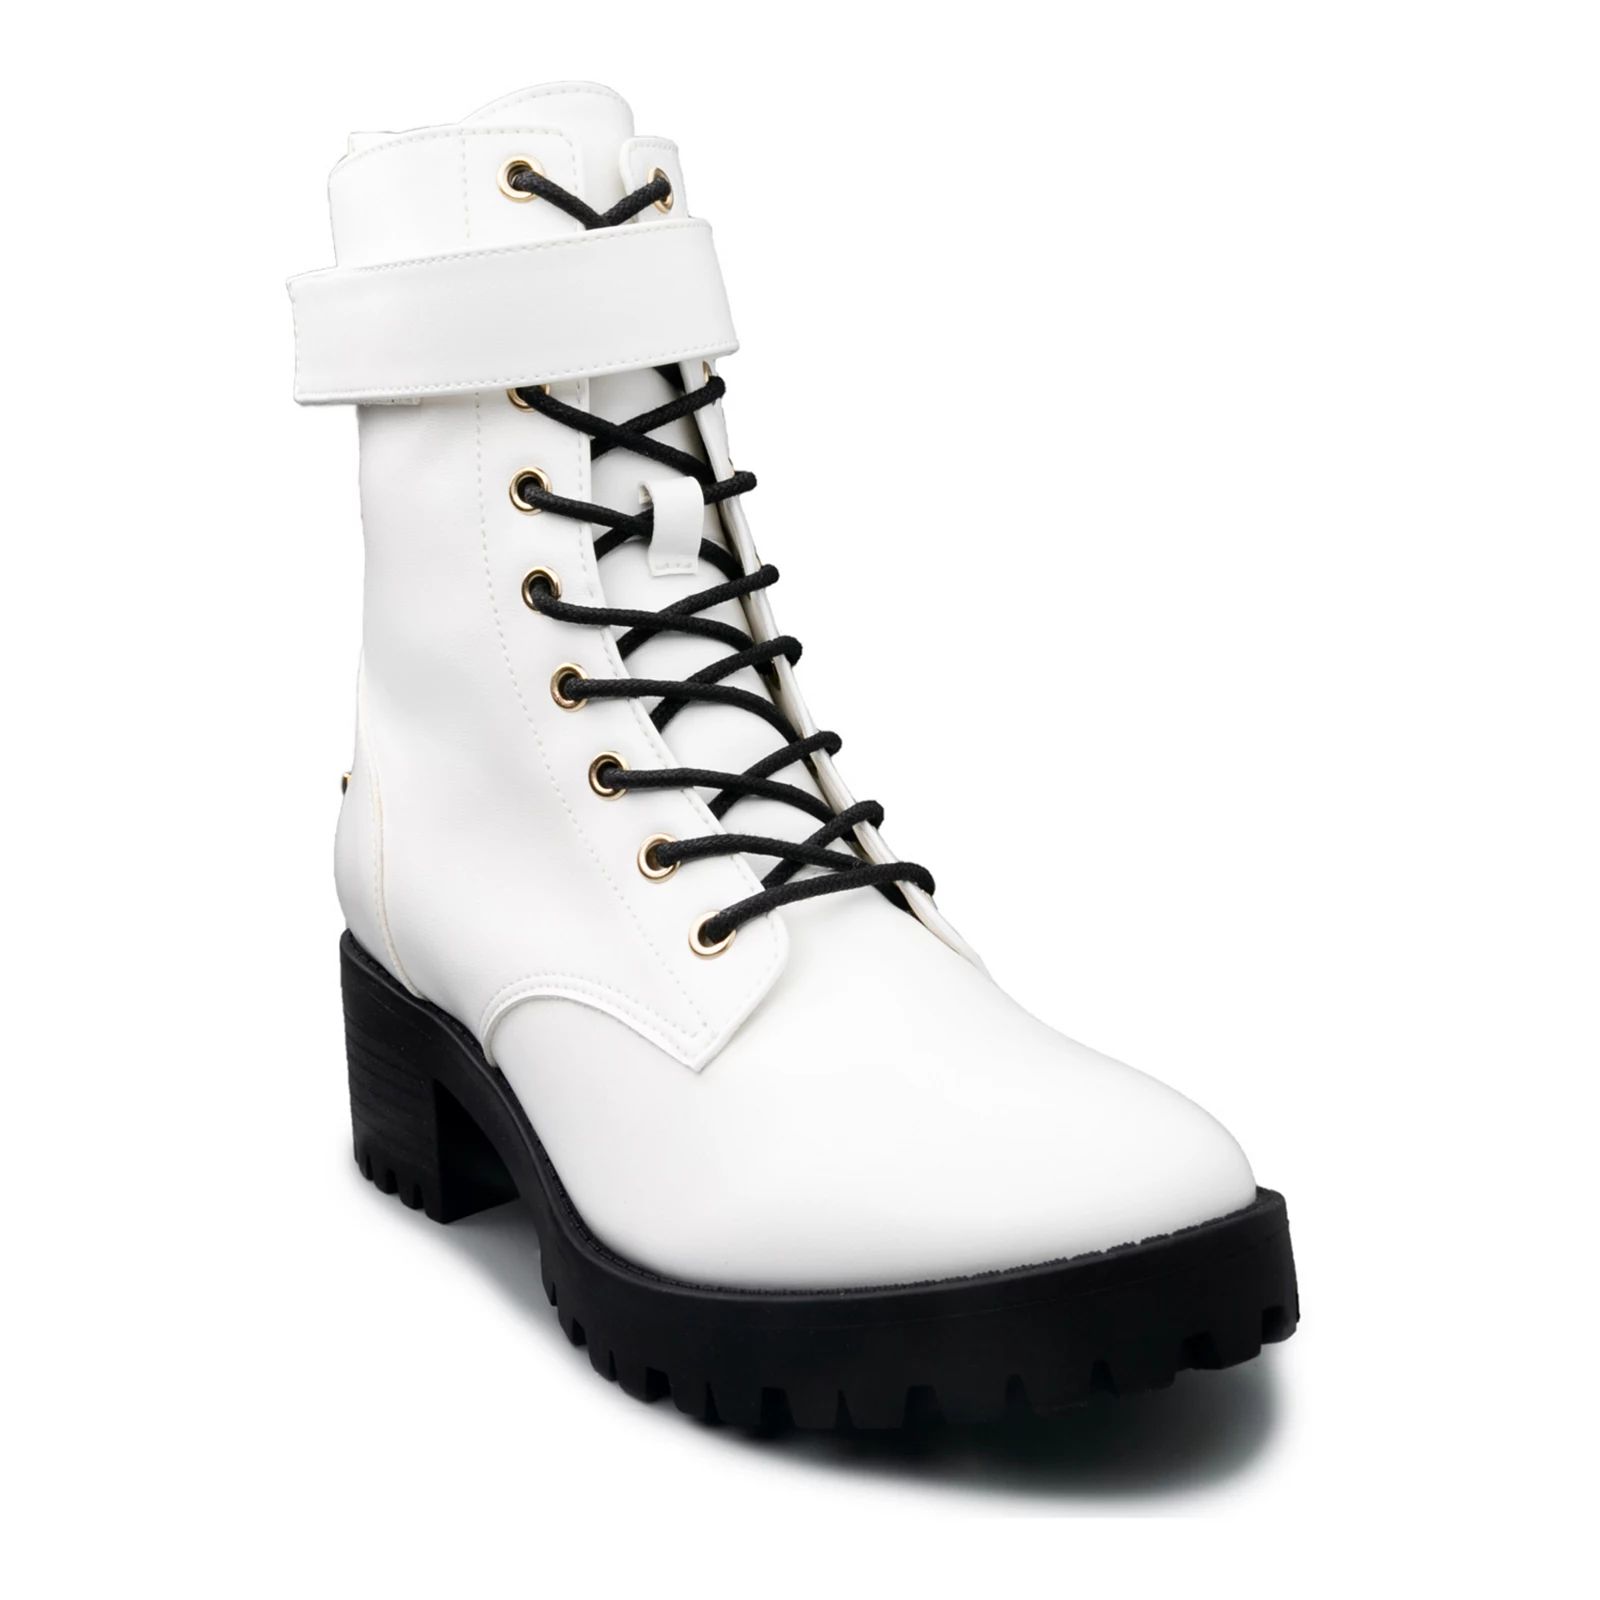 Juicy Couture Oodles Women's Combat Boots, Size: 9, White | Kohl's